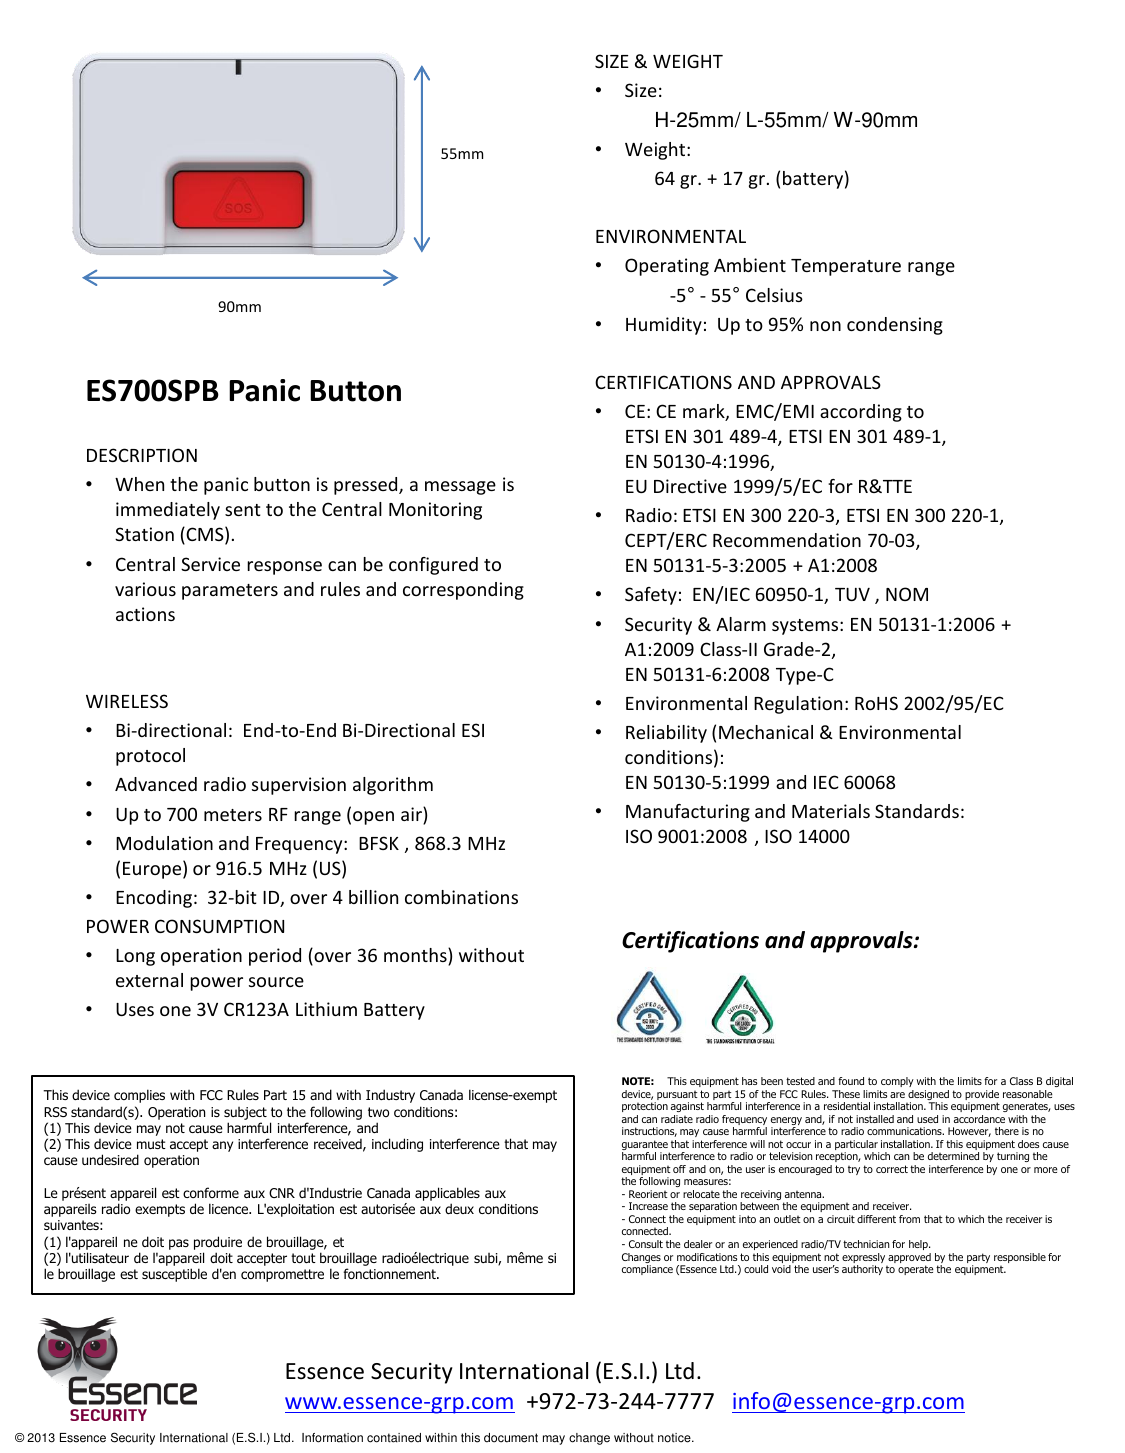            ES700SPB Panic Button  DESCRIPTION •When the panic button is pressed, a message is immediately sent to the Central Monitoring Station (CMS).   •Central Service response can be configured to various parameters and rules and corresponding actions   WIRELESS •Bi-directional:  End-to-End Bi-Directional ESI protocol •Advanced radio supervision algorithm •Up to 700 meters RF range (open air) •Modulation and Frequency:  BFSK , 868.3 MHz (Europe) or 916.5 MHz (US) •Encoding:  32-bit ID, over 4 billion combinations POWER CONSUMPTION •Long operation period (over 36 months) without external power source •Uses one 3V CR123A Lithium Battery   SIZE &amp; WEIGHT •Size:   H-25mm/ L-55mm/ W-90mm •Weight:  64 gr. + 17 gr. (battery)  ENVIRONMENTAL •Operating Ambient Temperature range   -5° - 55° Celsius •Humidity:  Up to 95% non condensing  CERTIFICATIONS AND APPROVALS •CE: CE mark, EMC/EMI according to  ETSI EN 301 489-4, ETSI EN 301 489-1,  EN 50130-4:1996, EU Directive 1999/5/EC for R&amp;TTE  •Radio: ETSI EN 300 220-3, ETSI EN 300 220-1, CEPT/ERC Recommendation 70-03,   EN 50131-5-3:2005 + A1:2008  •Safety:  EN/IEC 60950-1, TUV , NOM •Security &amp; Alarm systems: EN 50131-1:2006 + A1:2009 Class-II Grade-2,   EN 50131-6:2008 Type-C •Environmental Regulation: RoHS 2002/95/EC •Reliability (Mechanical &amp; Environmental conditions):   EN 50130-5:1999 and IEC 60068 •Manufacturing and Materials Standards:  ISO 9001:2008 , ISO 14000  55mm 90mm Essence Security International (E.S.I.) Ltd. www.essence-grp.com  +972-73-244-7777   info@essence-grp.com   © 2013 Essence Security International (E.S.I.) Ltd.  Information contained within this document may change without notice. Certifications and approvals: This device complies with FCC Rules Part 15 and with Industry Canada license-exempt RSS standard(s). Operation is subject to the following two conditions: (1) This device may not cause harmful interference, and (2) This device must accept any interference received, including interference that may cause undesired operation  Le présent appareil est conforme aux CNR d&apos;Industrie Canada applicables aux appareils radio exempts de licence. L&apos;exploitation est autorisée aux deux conditions suivantes: (1) l&apos;appareil ne doit pas produire de brouillage, et (2) l&apos;utilisateur de l&apos;appareil doit accepter tout brouillage radioélectrique subi, même si le brouillage est susceptible d&apos;en compromettre le fonctionnement. NOTE:    This equipment has been tested and found to comply with the limits for a Class B digital device, pursuant to part 15 of the FCC Rules. These limits are designed to provide reasonable protection against harmful interference in a residential installation. This equipment generates, uses and can radiate radio frequency energy and, if not installed and used in accordance with the instructions, may cause harmful interference to radio communications. However, there is no guarantee that interference will not occur in a particular installation. If this equipment does cause harmful interference to radio or television reception, which can be determined by turning the equipment off and on, the user is encouraged to try to correct the interference by one or more of the following measures:  - Reorient or relocate the receiving antenna. - Increase the separation between the equipment and receiver. - Connect the equipment into an outlet on a circuit different from that to which the receiver is connected. - Consult the dealer or an experienced radio/TV technician for help. Changes or modifications to this equipment not expressly approved by the party responsible for compliance (Essence Ltd.) could void the user’s authority to operate the equipment. 